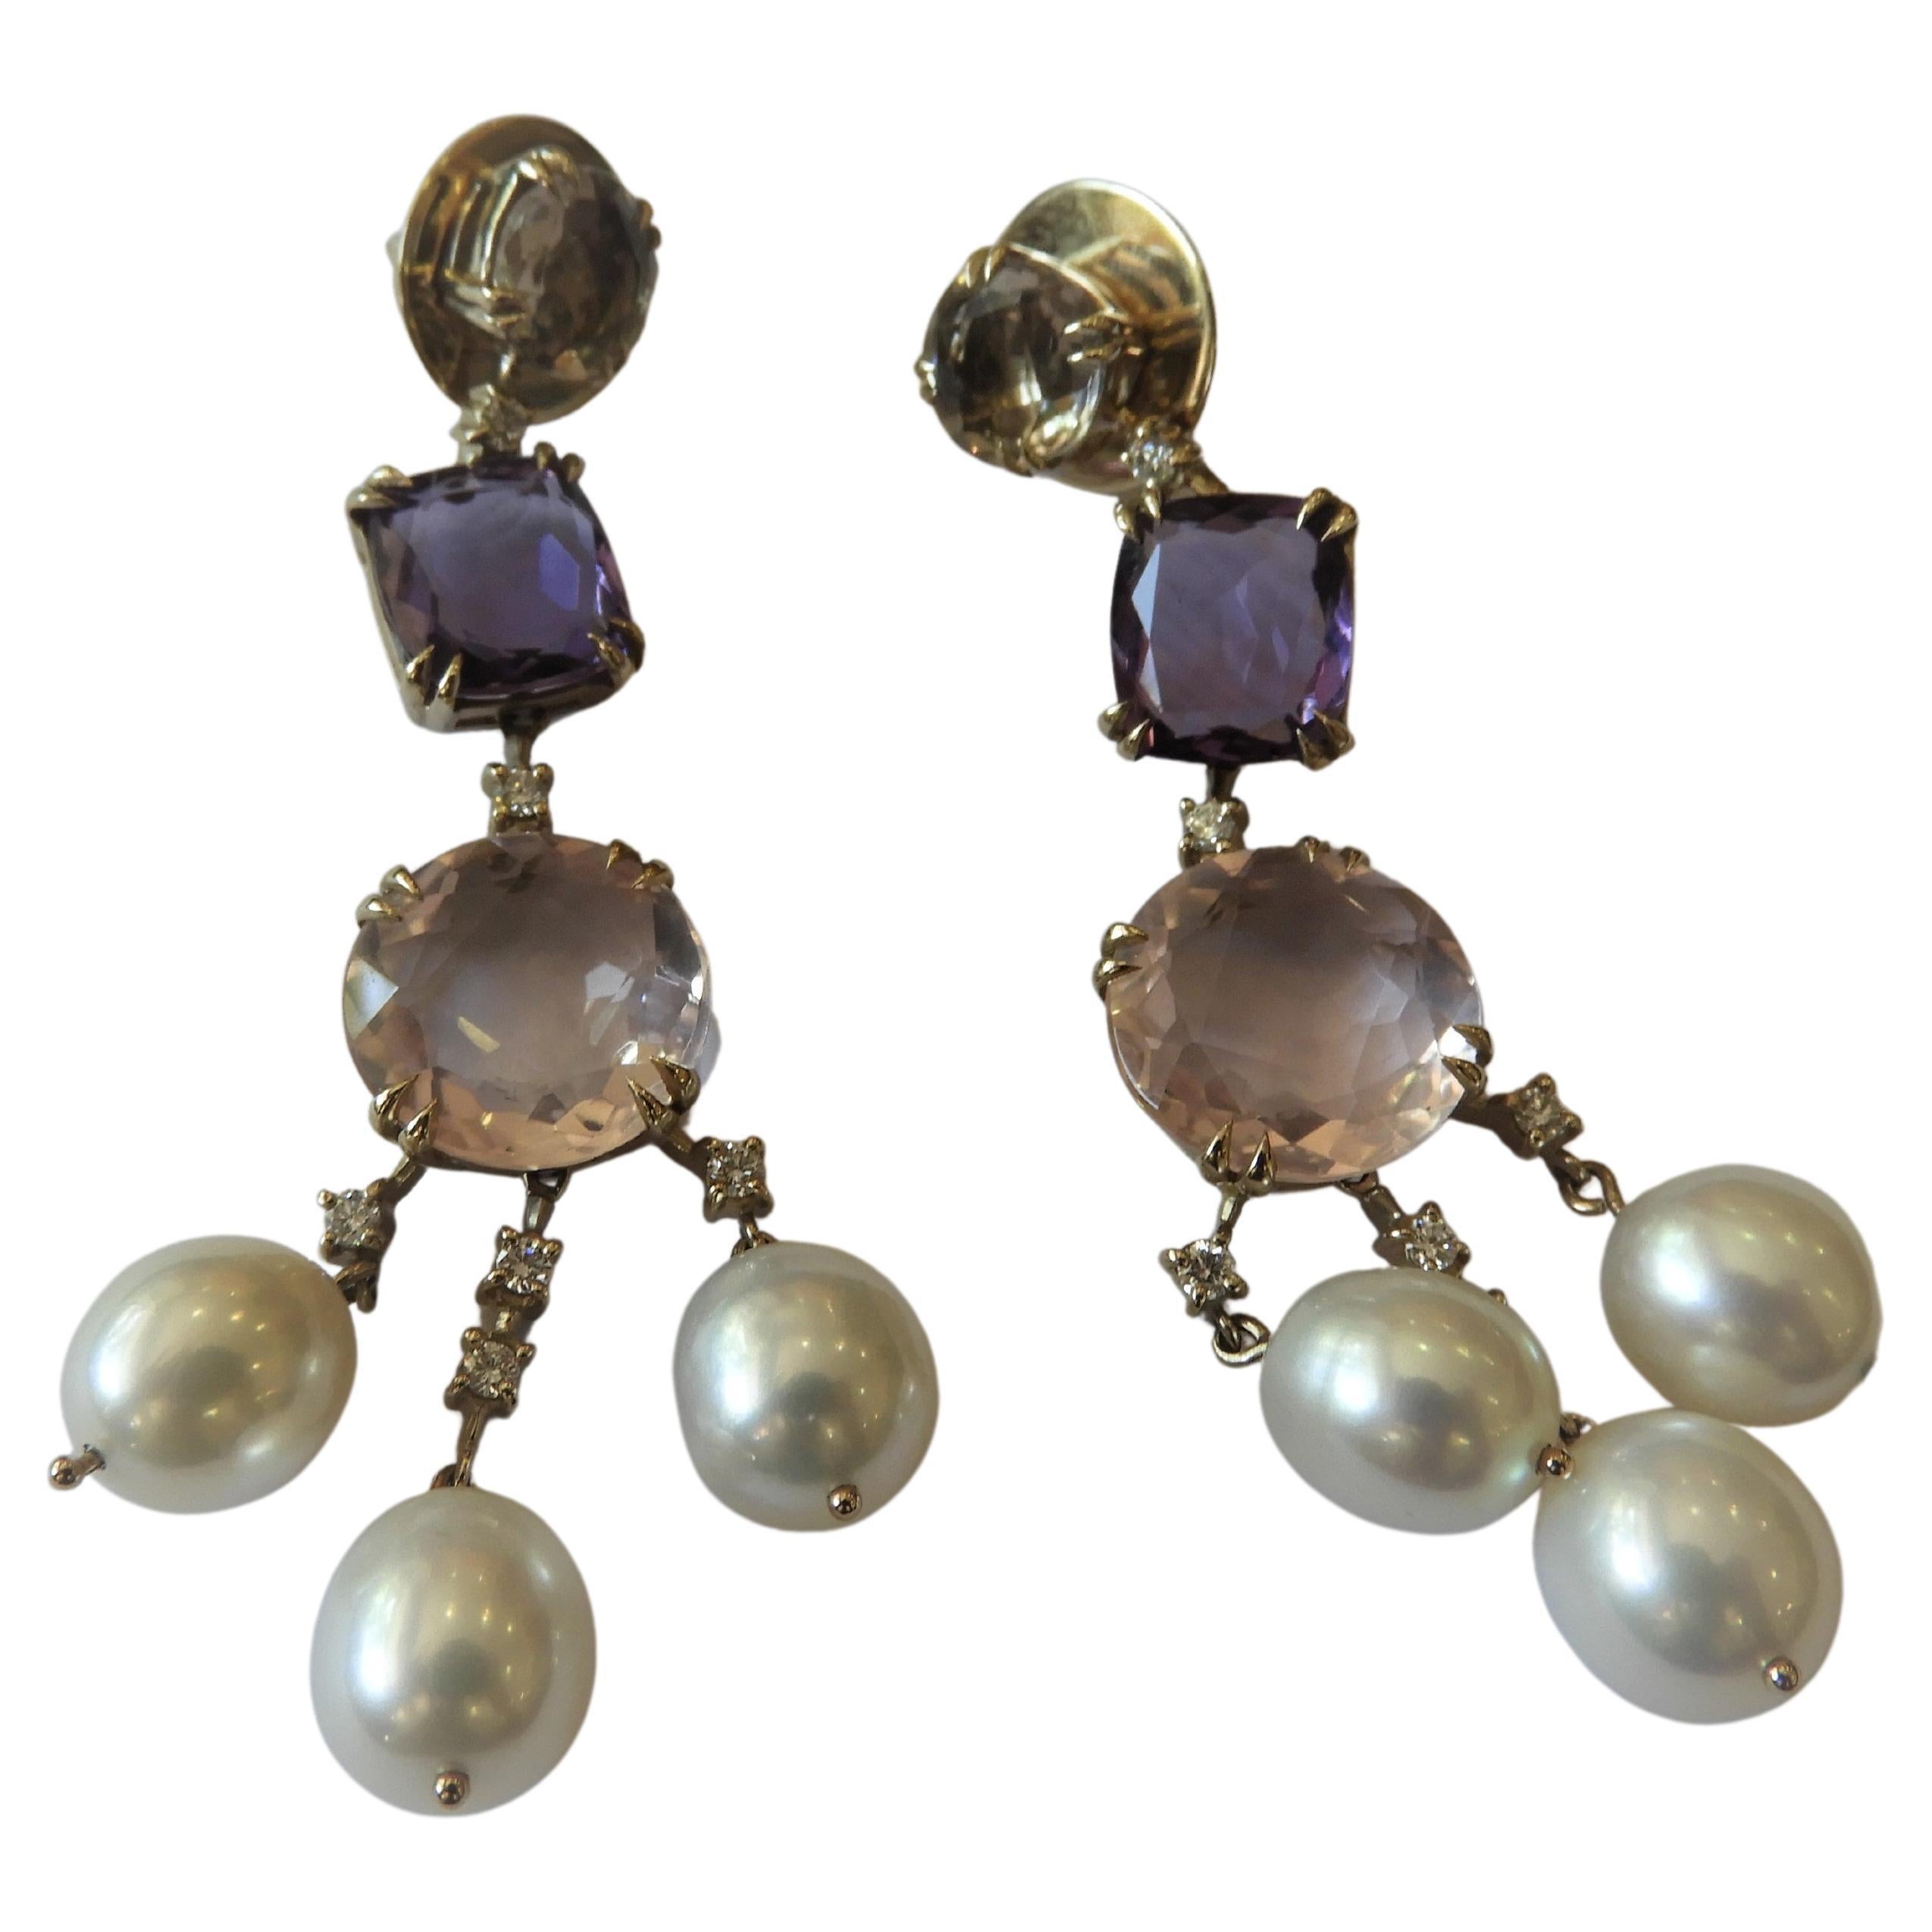 Stunning pair chandelier Primavera Earrings from reknown Brazilian jeweller H. Stern's 'Primavera' collection.
Surmount is an 8.0 mm mixed round cut champagne quartz - transparent with light brownish yellow color. 
Cushion cut amethysts measuring